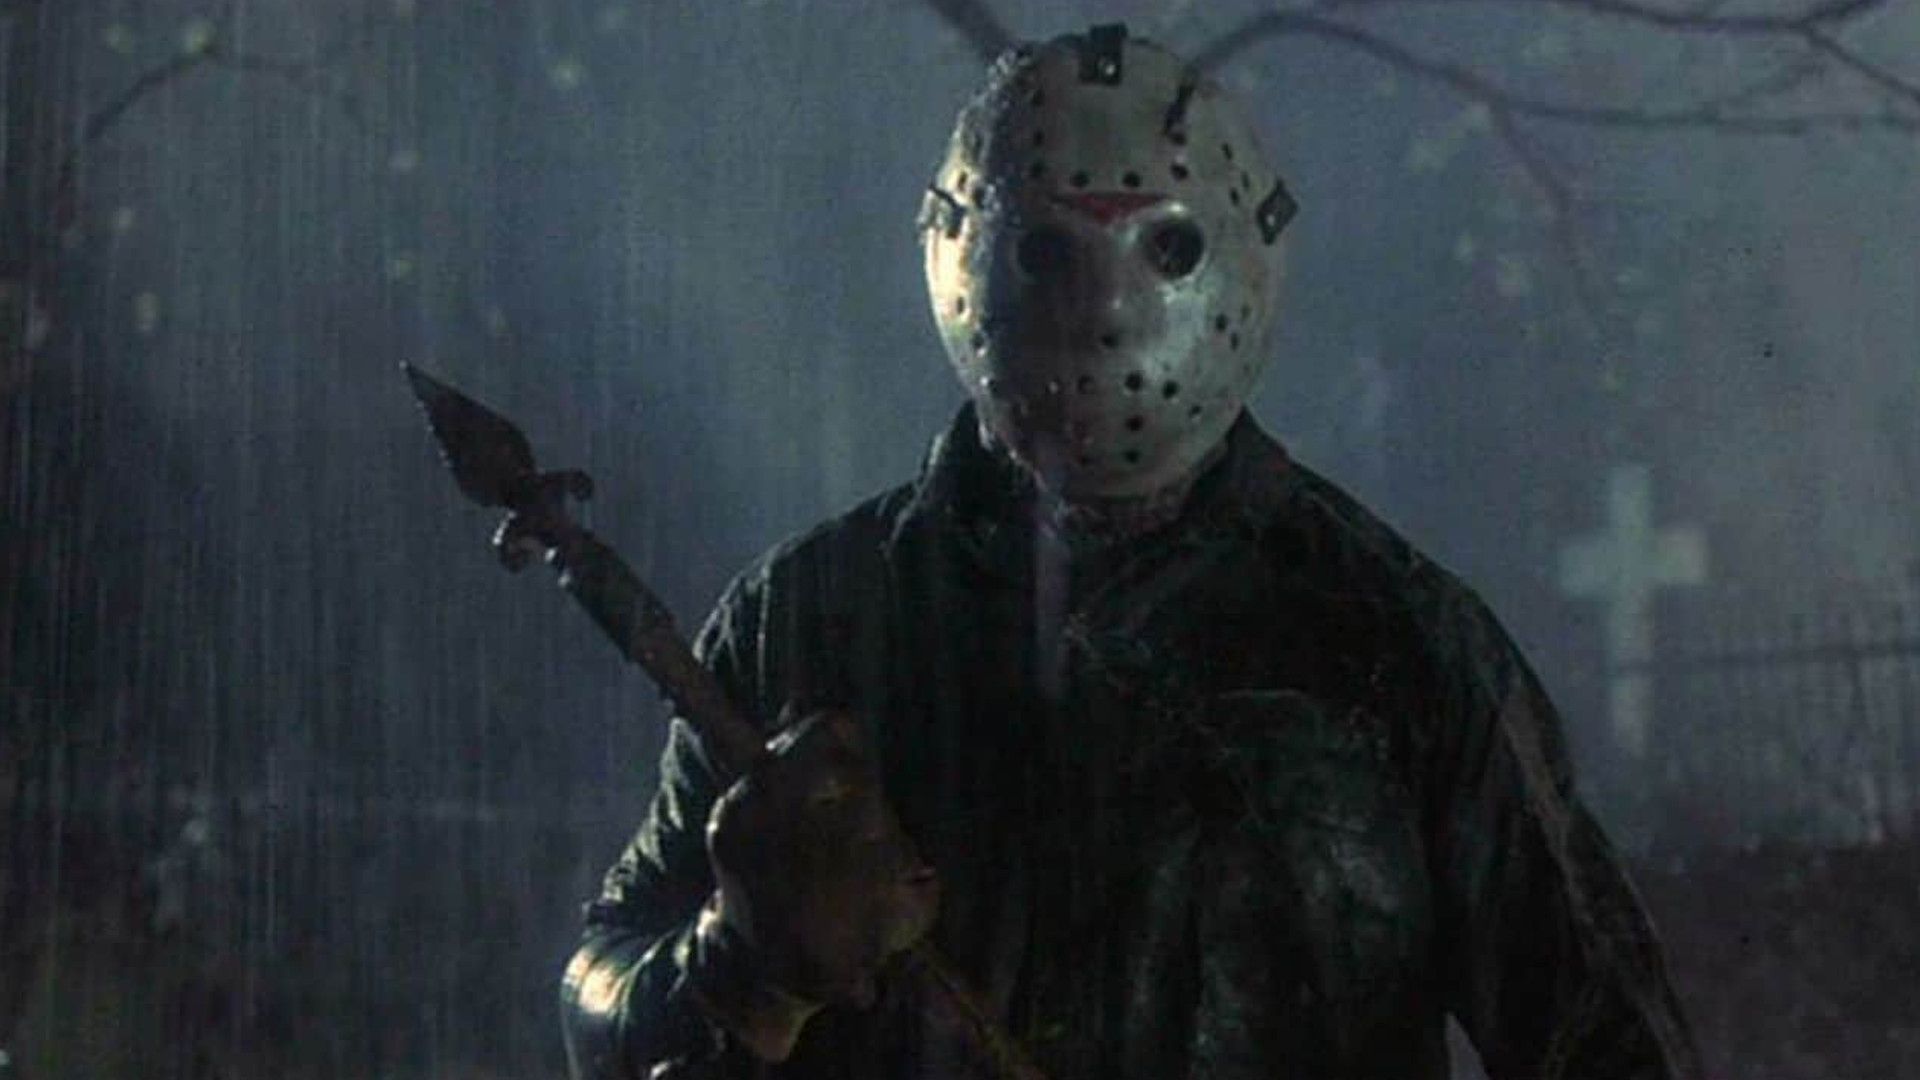 Jason Voorhees in Friday the 13th Part 6 in a graveyard wearing a hockey mask and holding a spear in the rain.